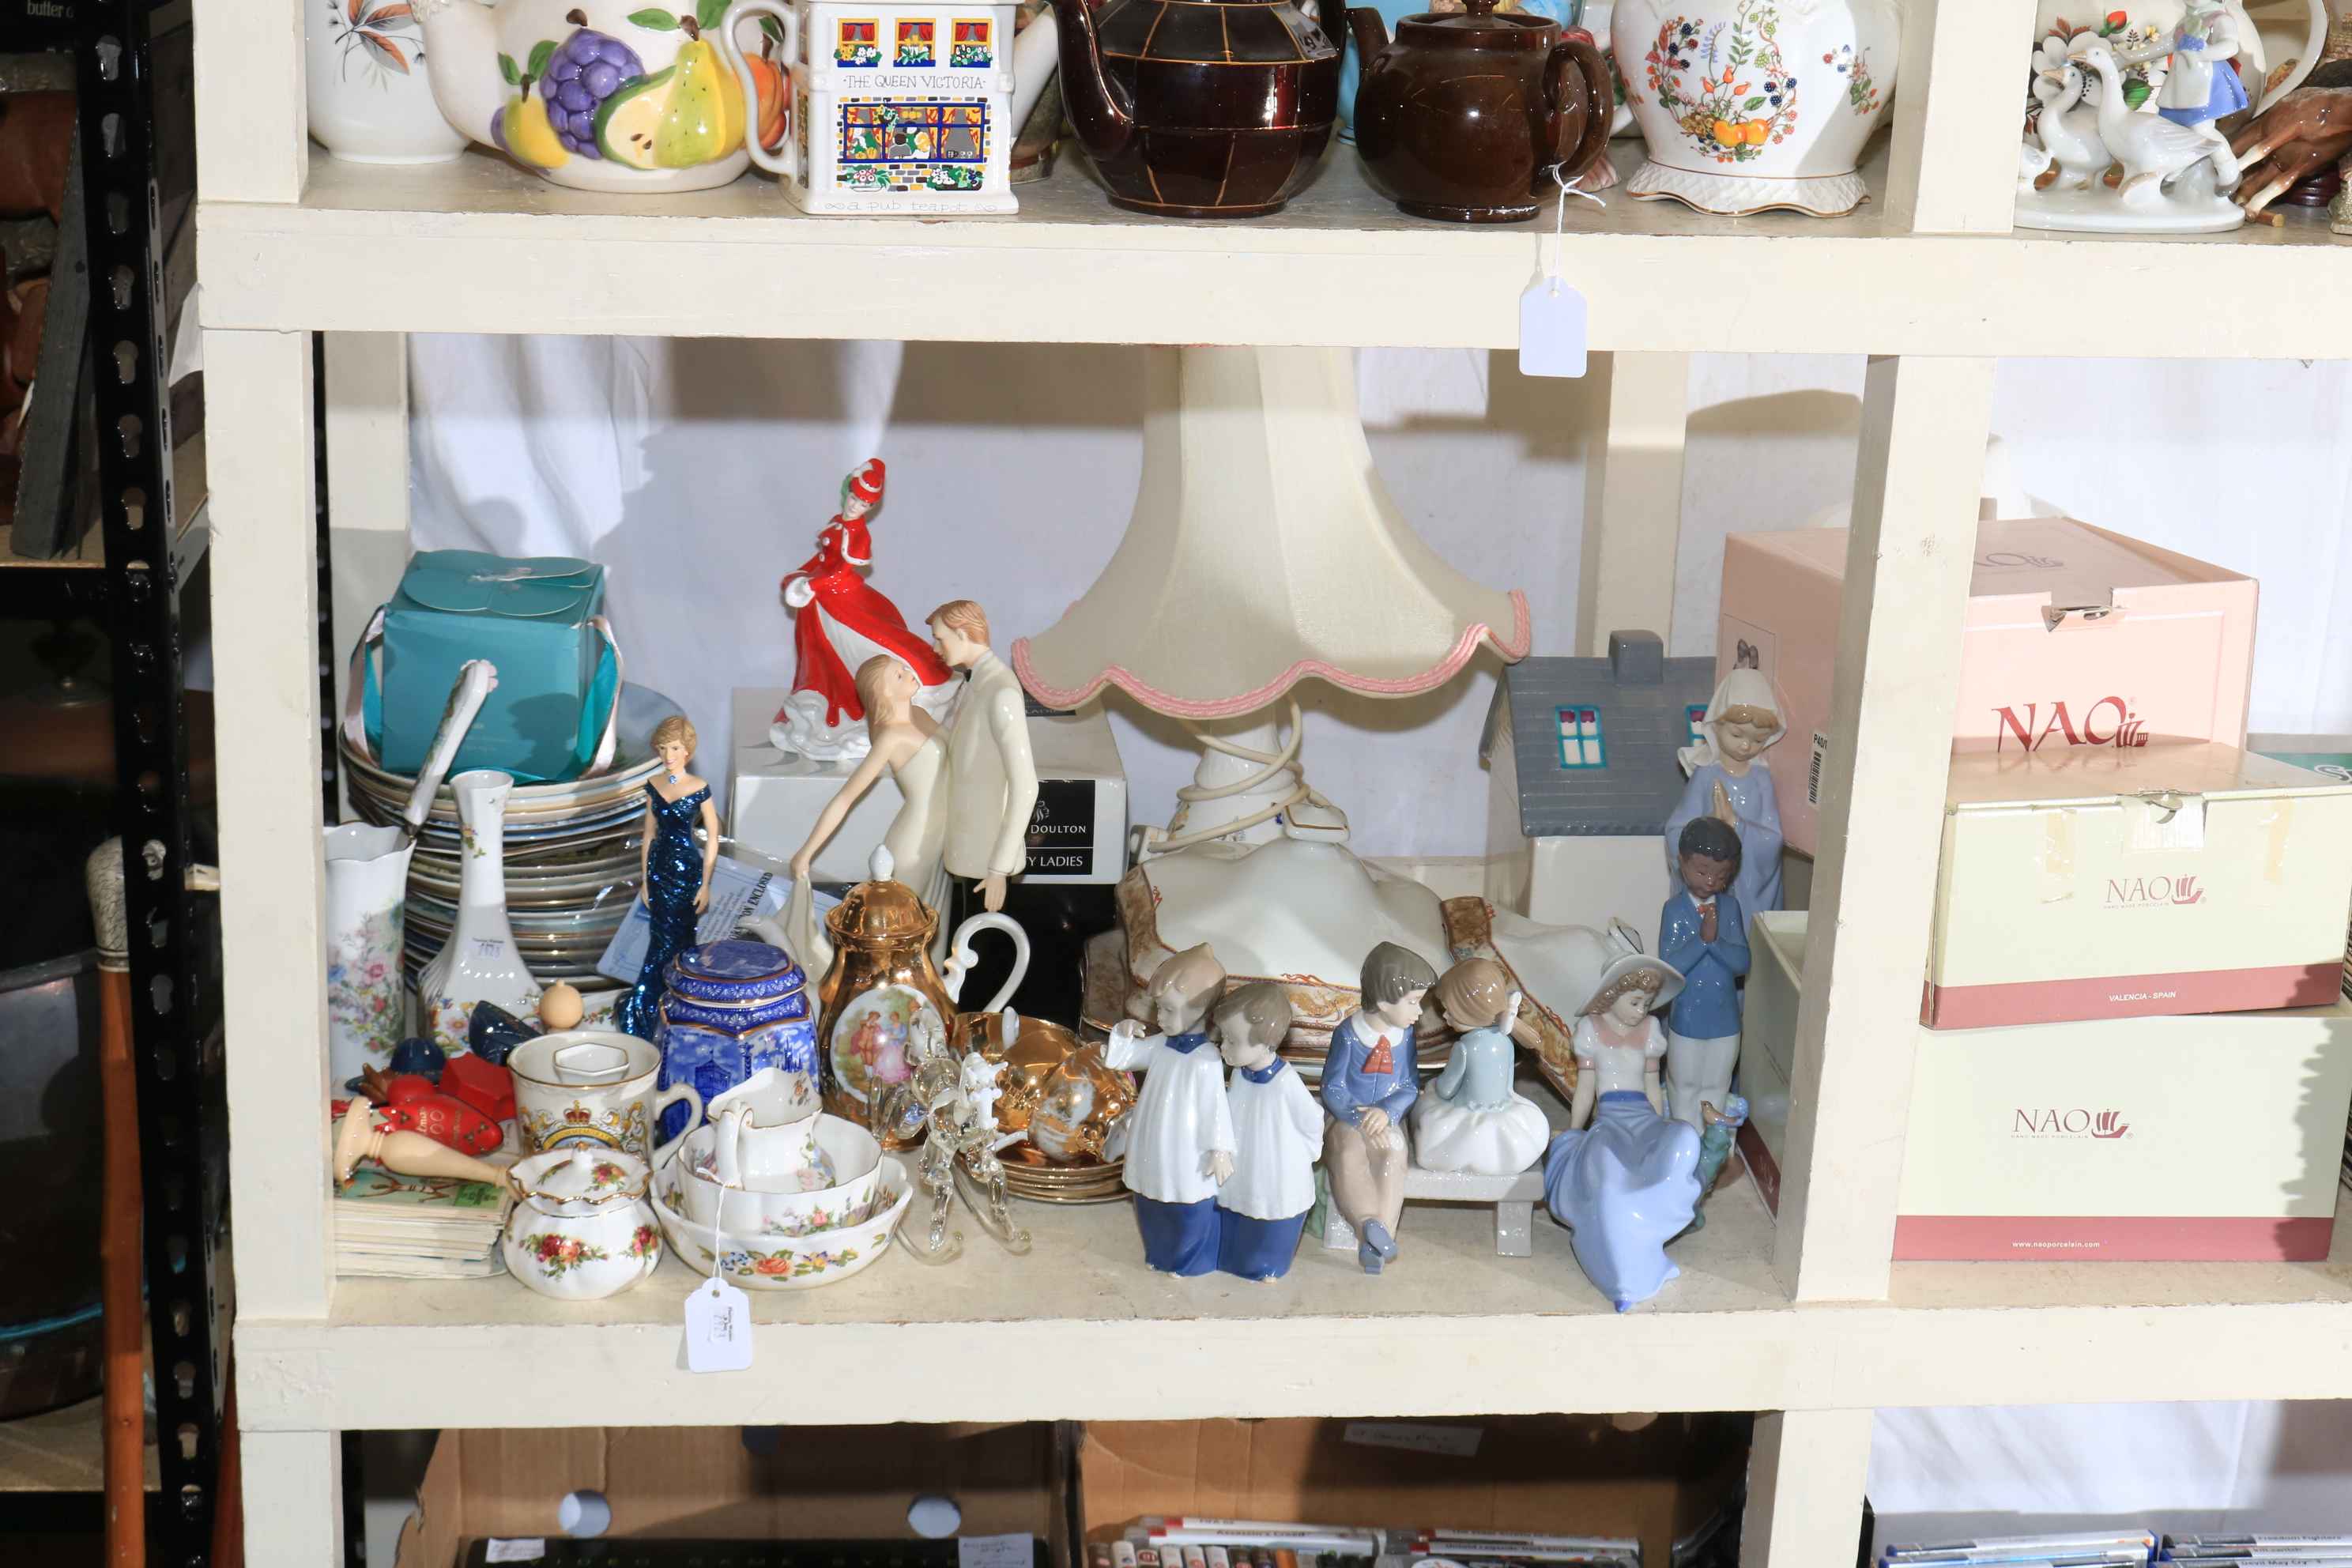 Nao and Royal Doulton figurines, plates, FDCs, Aynsley table lamp, etc.